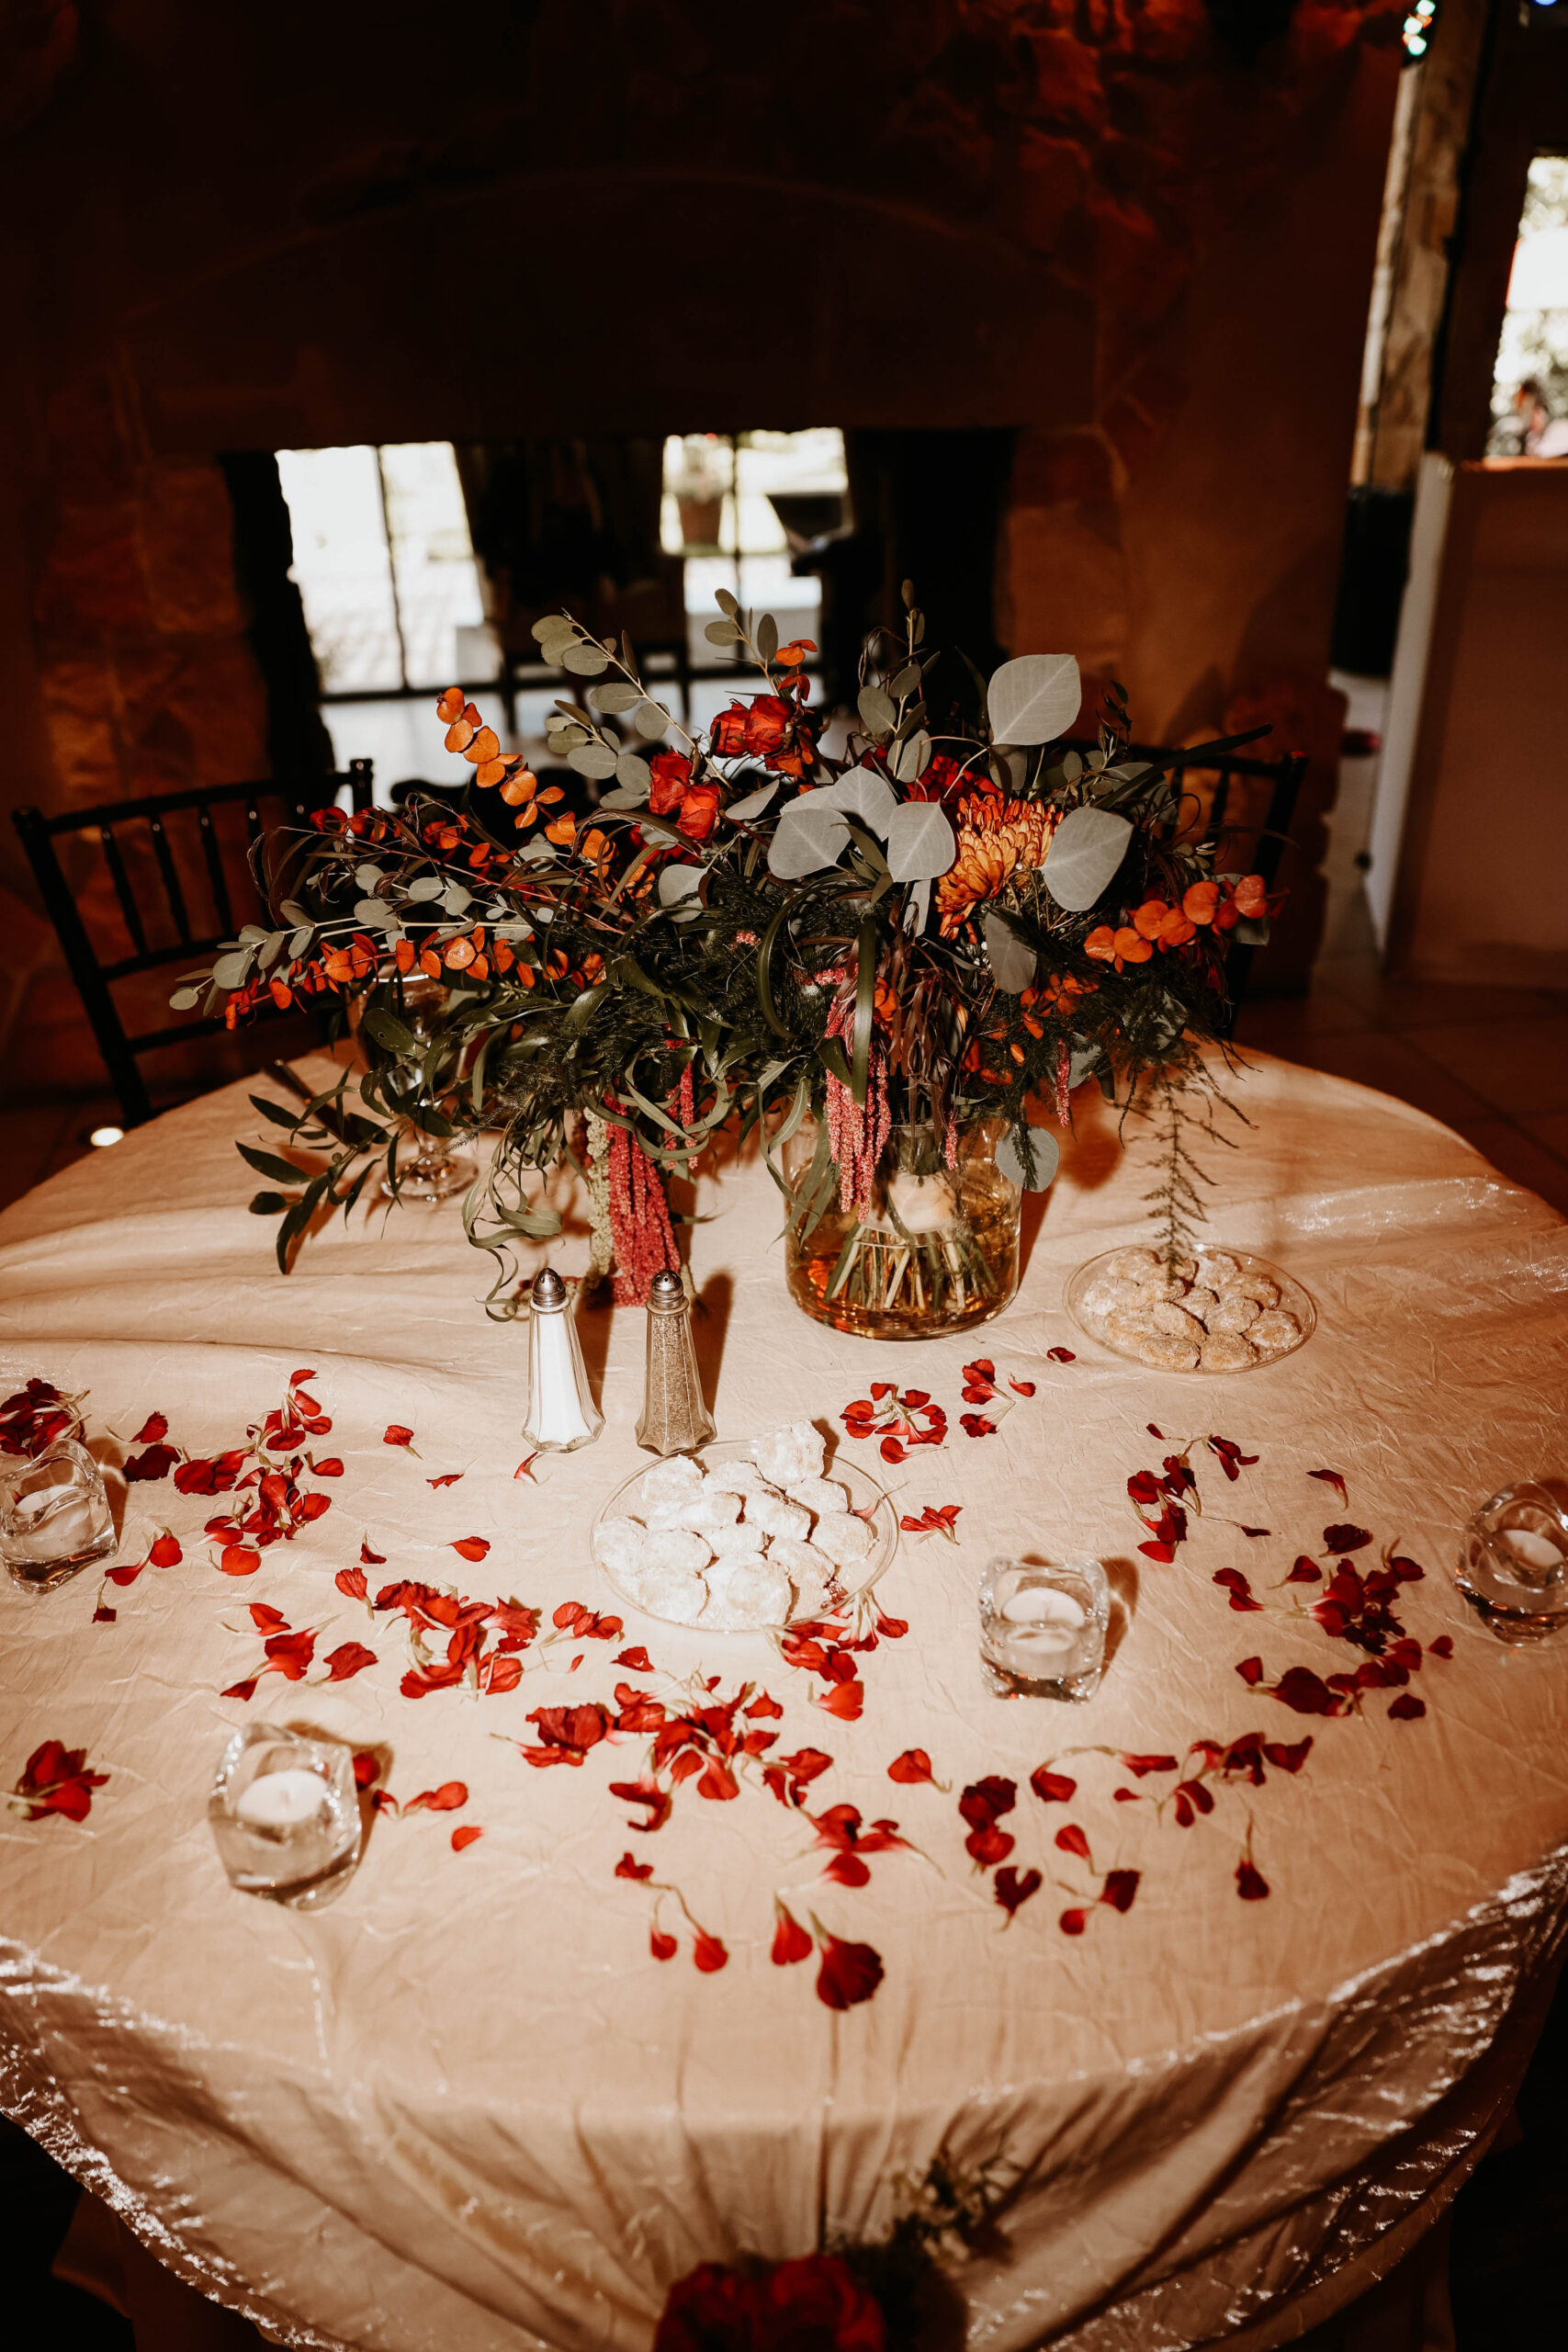 wedding reception table decor with red flower petals on the table